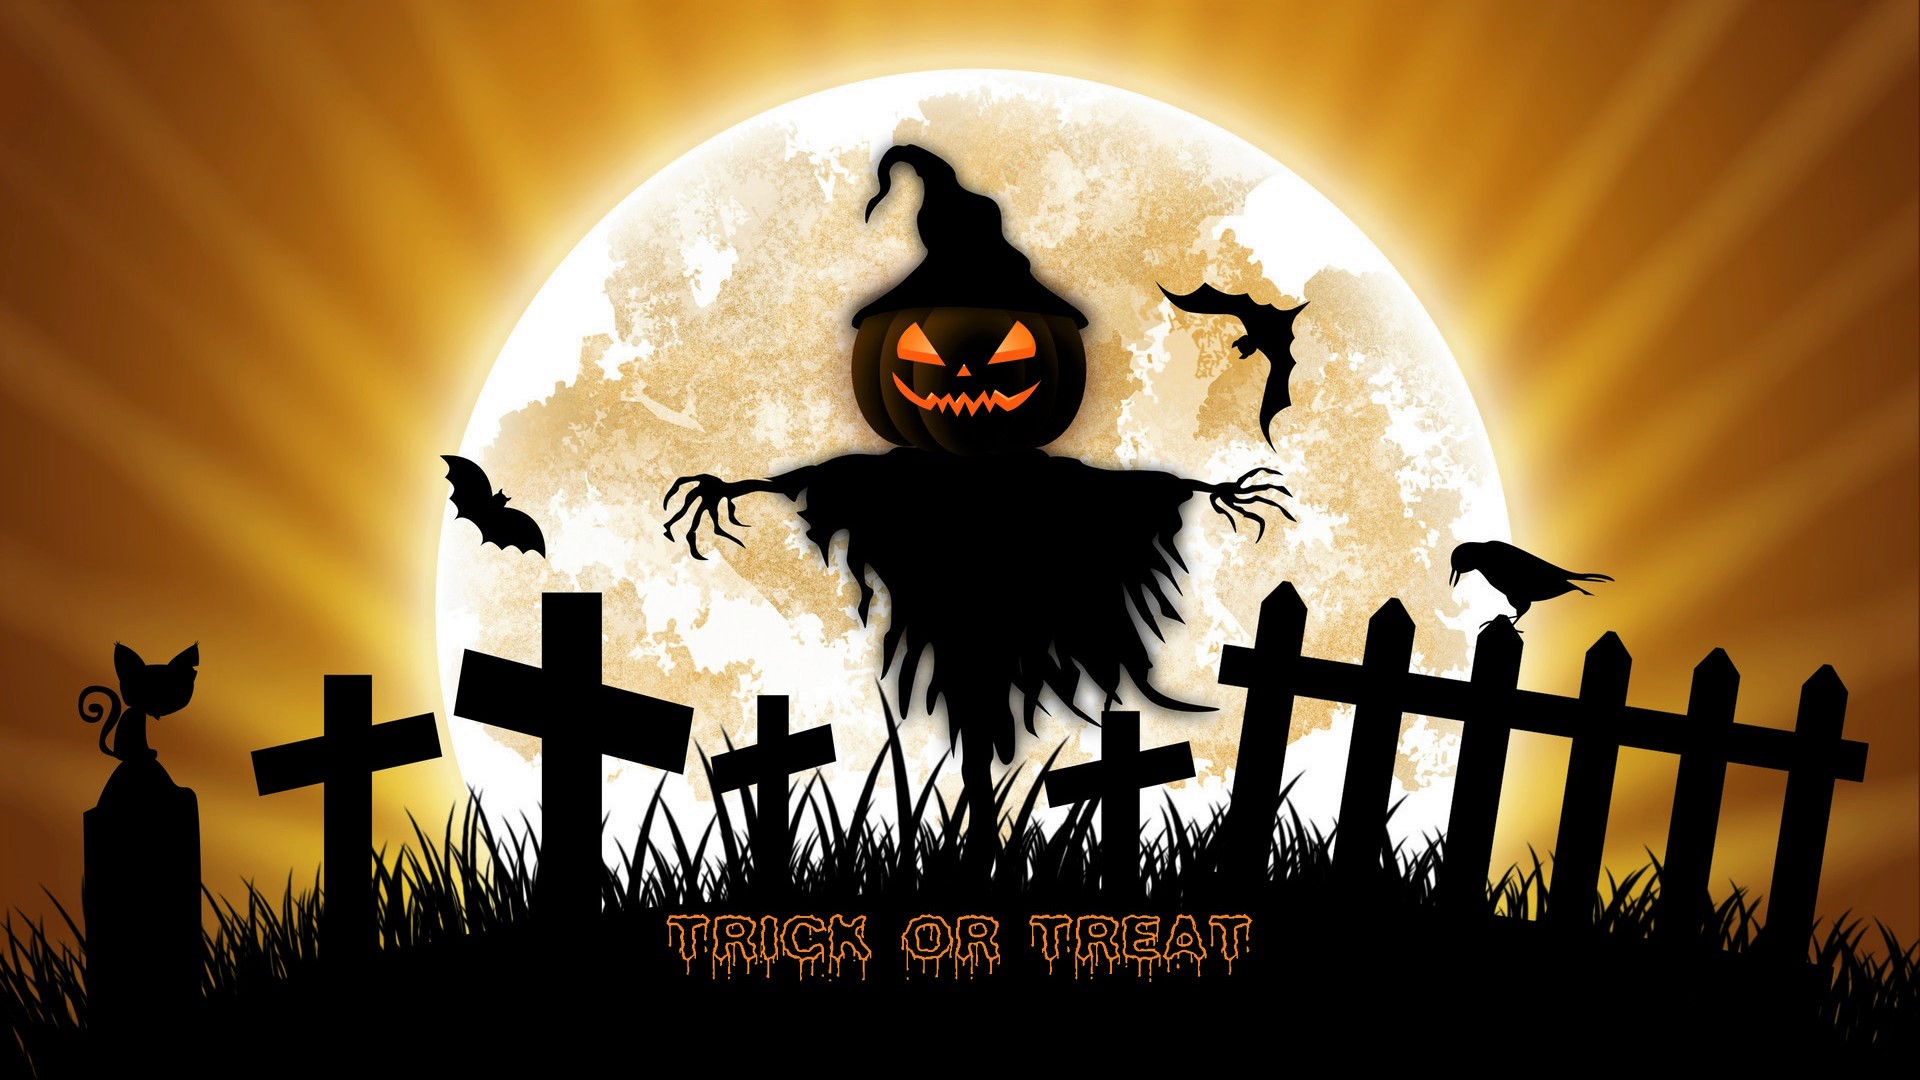 holiday, halloween, bat, fence, jack o' lantern, moon, scarecrow, trick or treat wallpaper for mobile